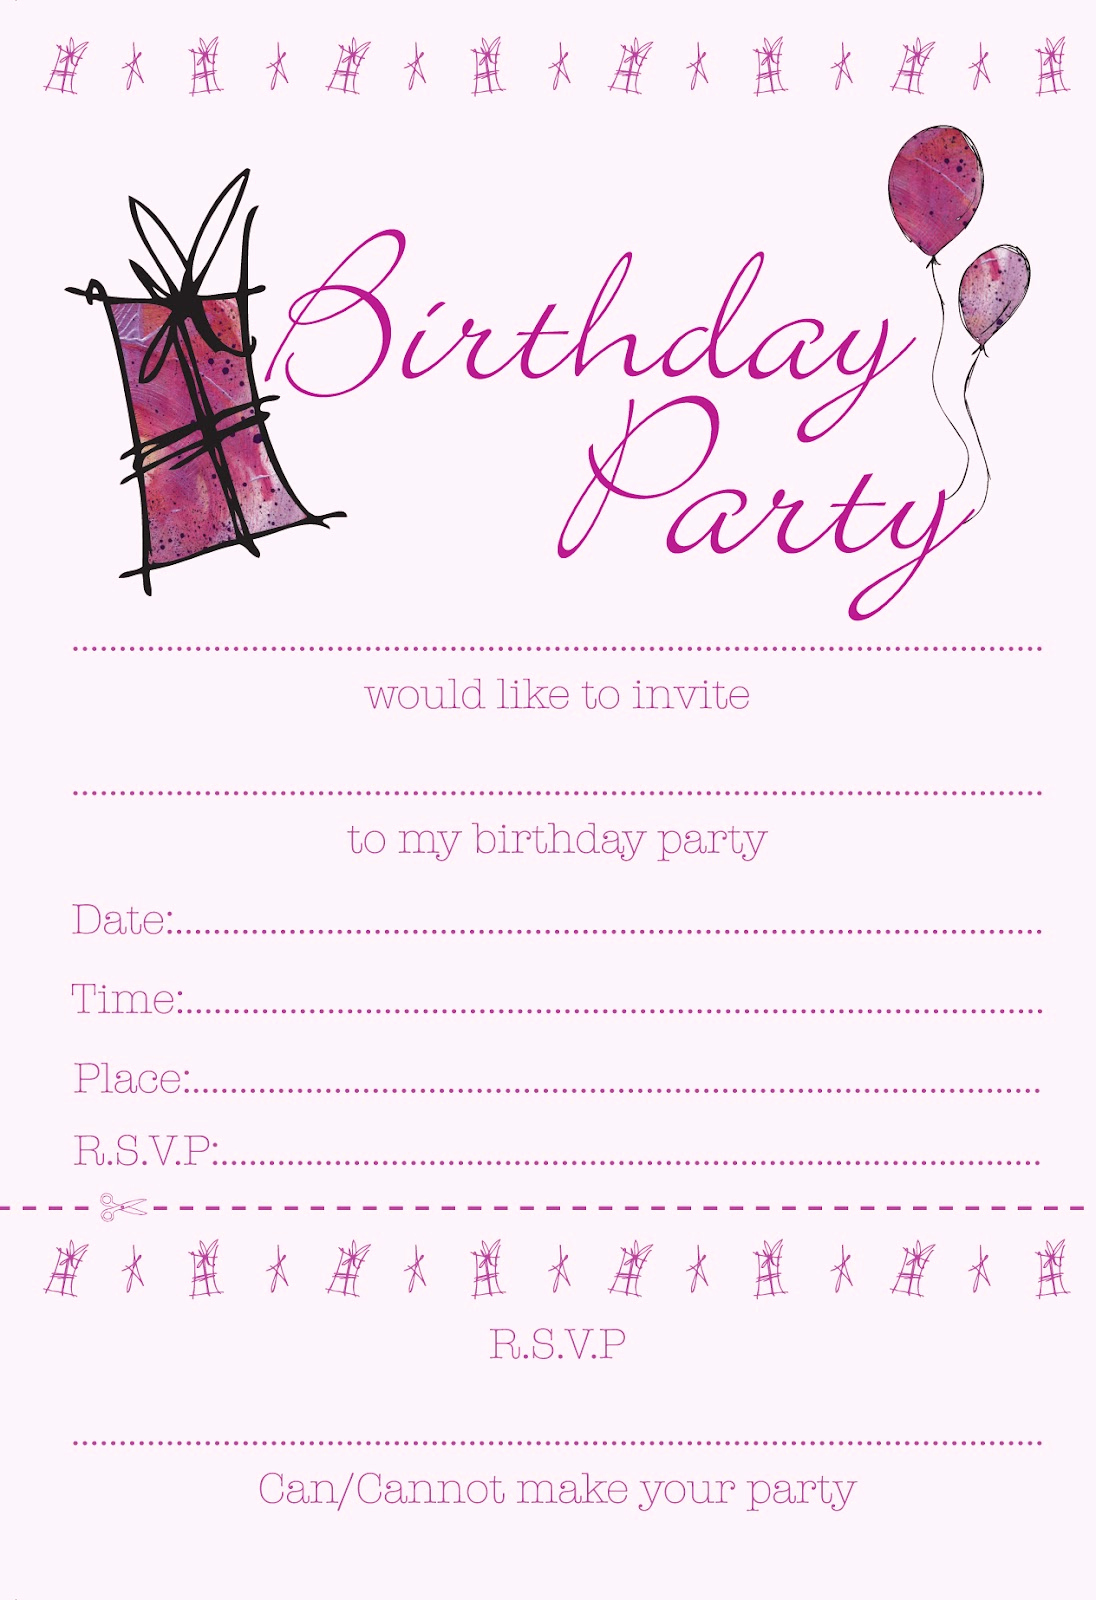 Free Templates for Invitations Luxury Printable Birthday Invitations for Girls Free Template